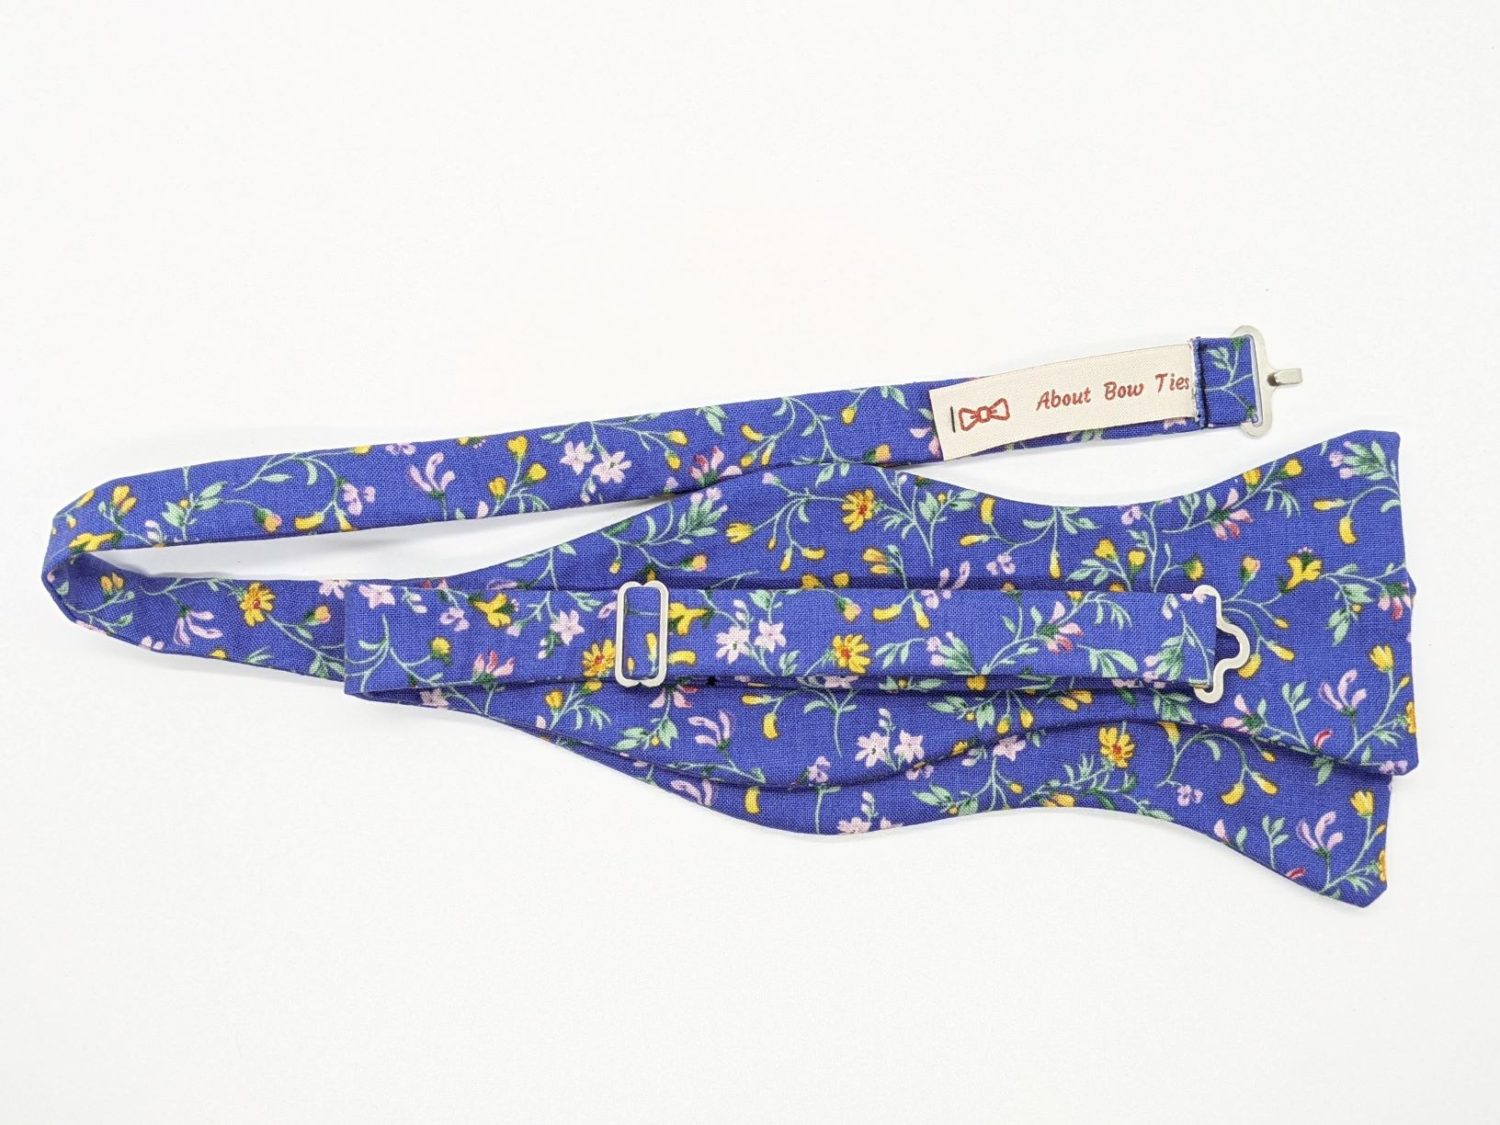 Purple Floral Bow Tie - About Bow Ties - Spring Collection